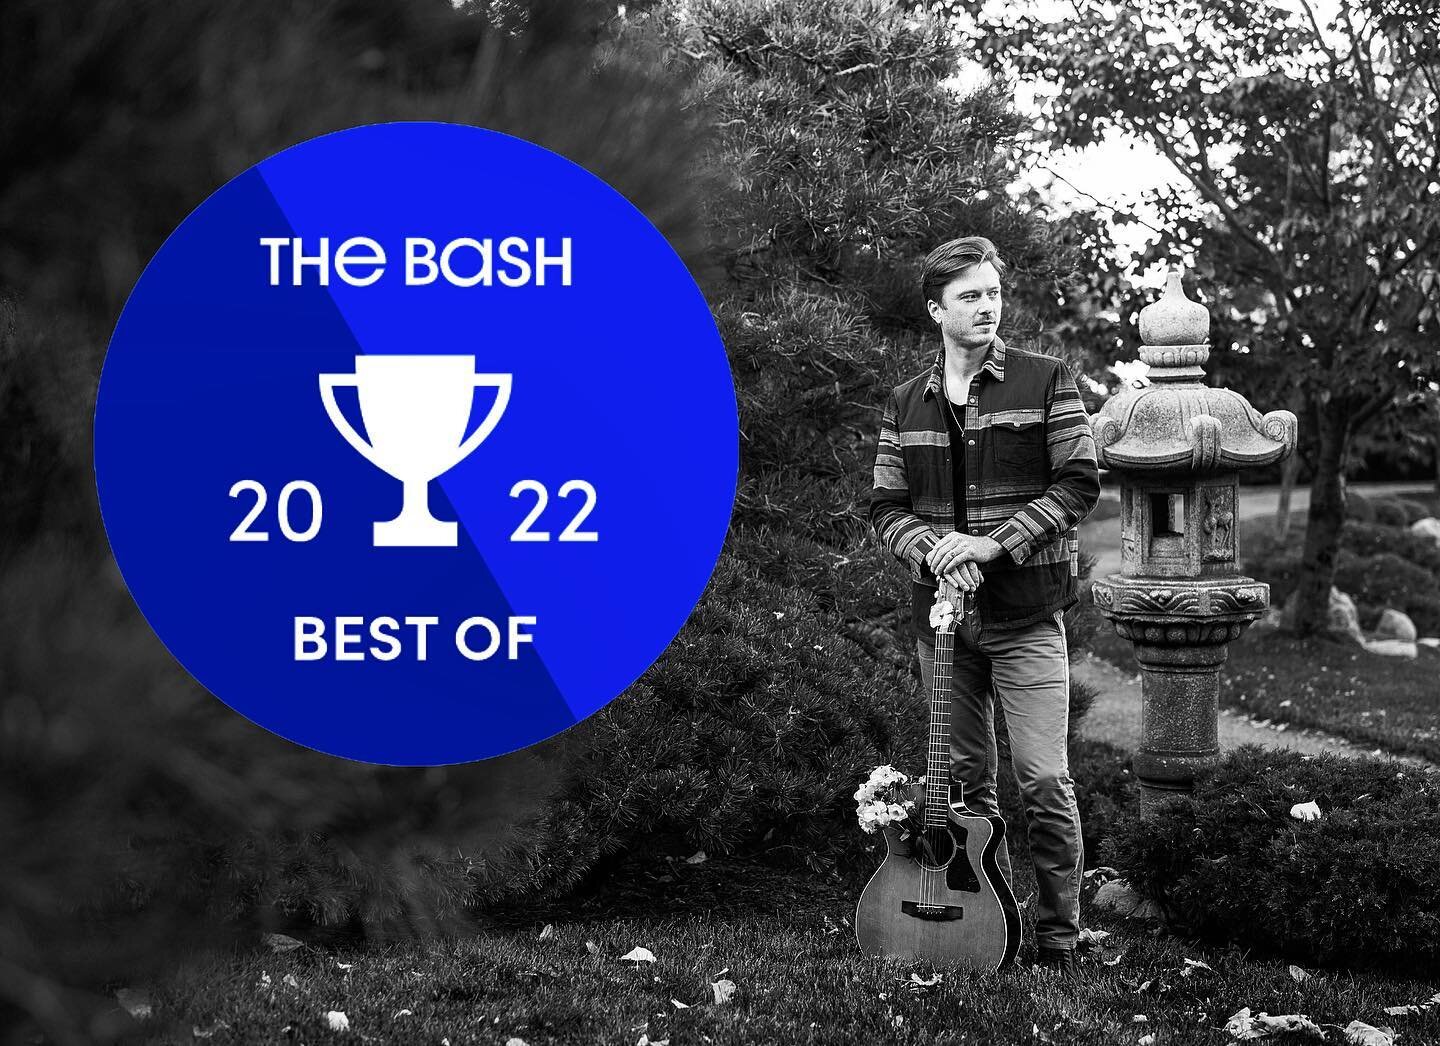 Four years running as the Best of the Bash @thebash. In 2022 I played the most gigs I have ever played in a calendar year&hellip;188 to be exact. All while raising two beautiful girls, Lennon and Marley with my amazing wife @kimmygracehair.

2023 is 